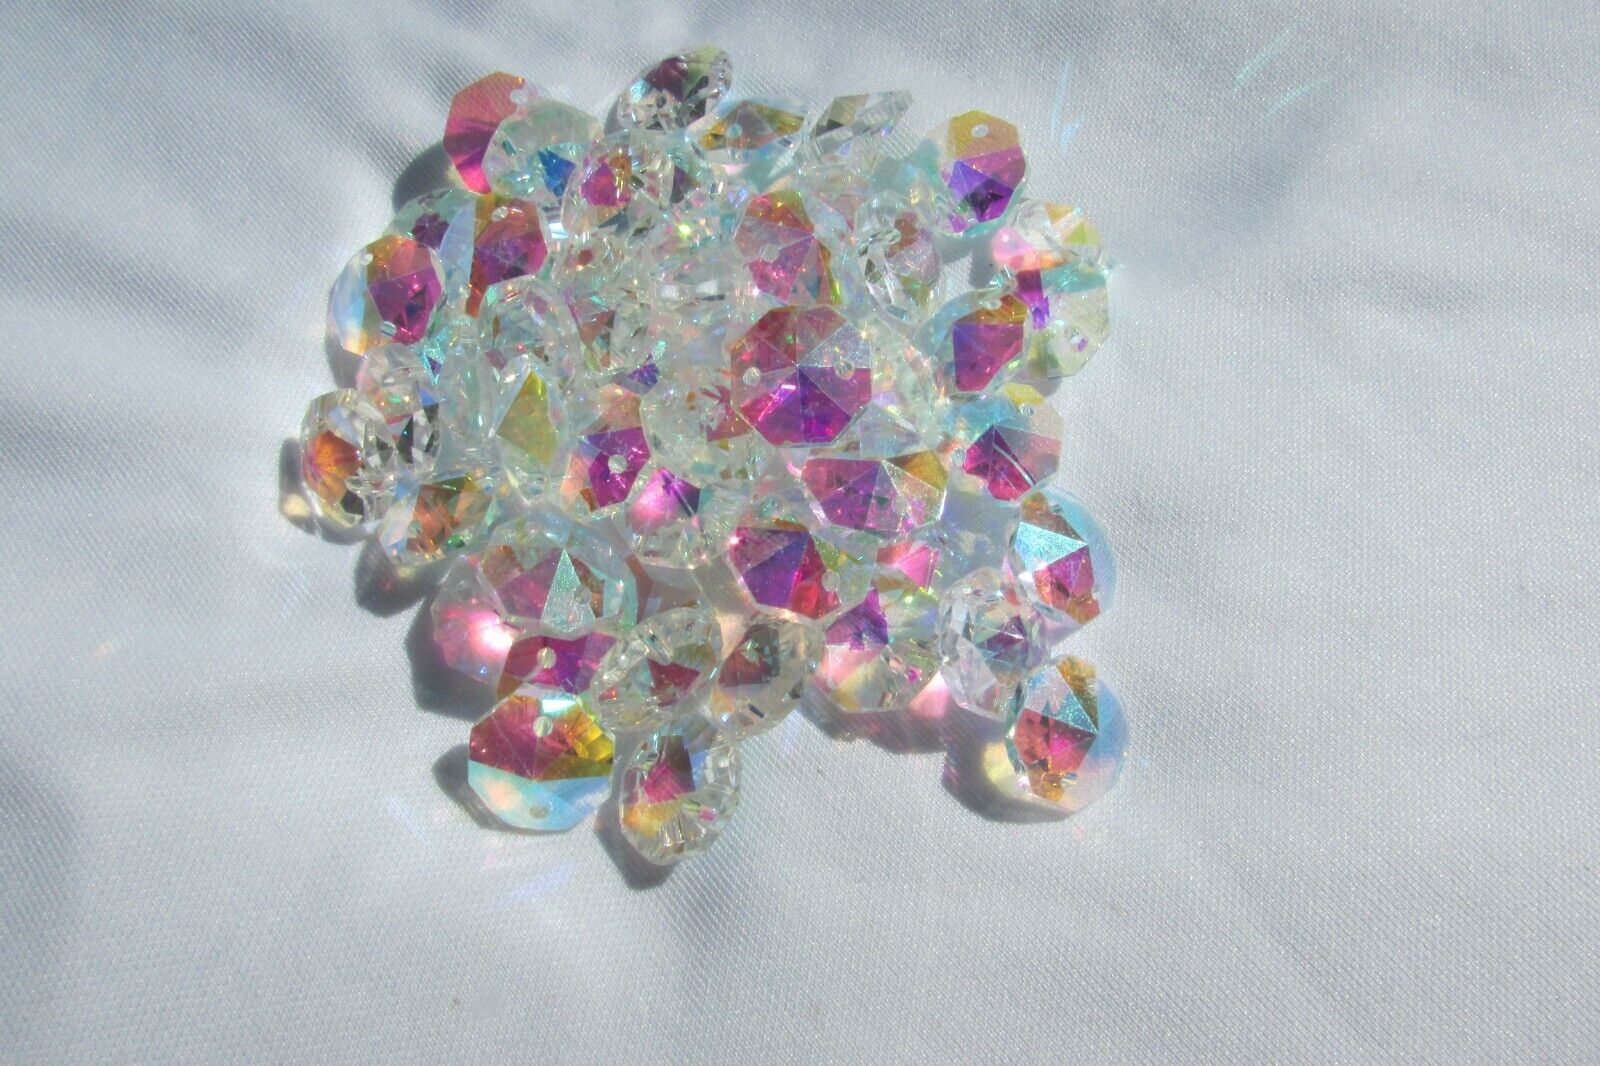  200- 14MM AB color AAA 2 HOLE OCTAGON CRYSTAL GLASS BEADS CHANDELIER Без бренда